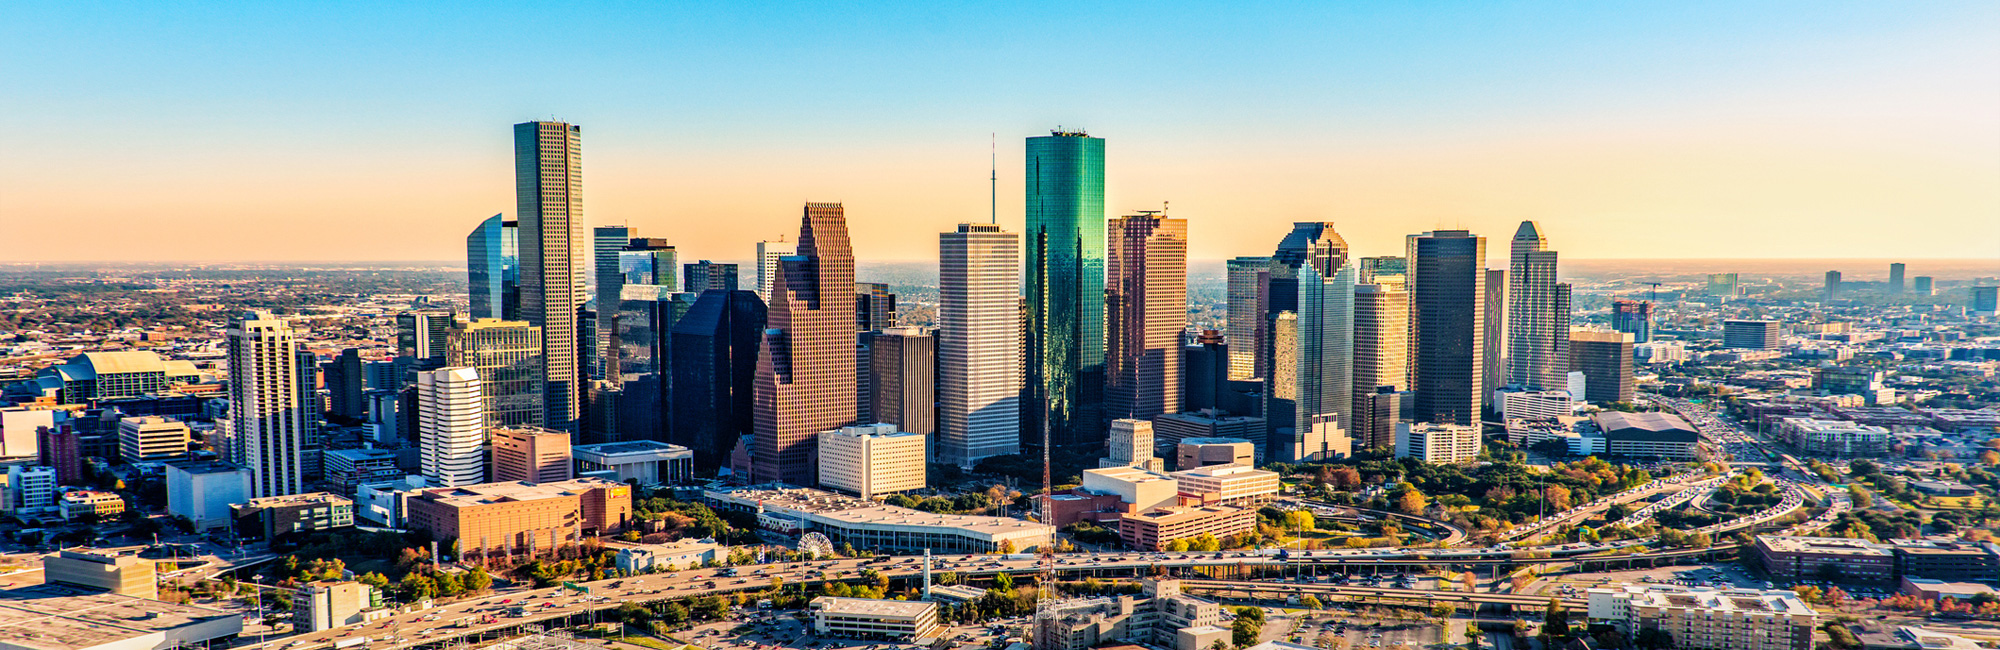 Harris County Texas Selects Tradition to Lead Risk Management and Renewable Energy